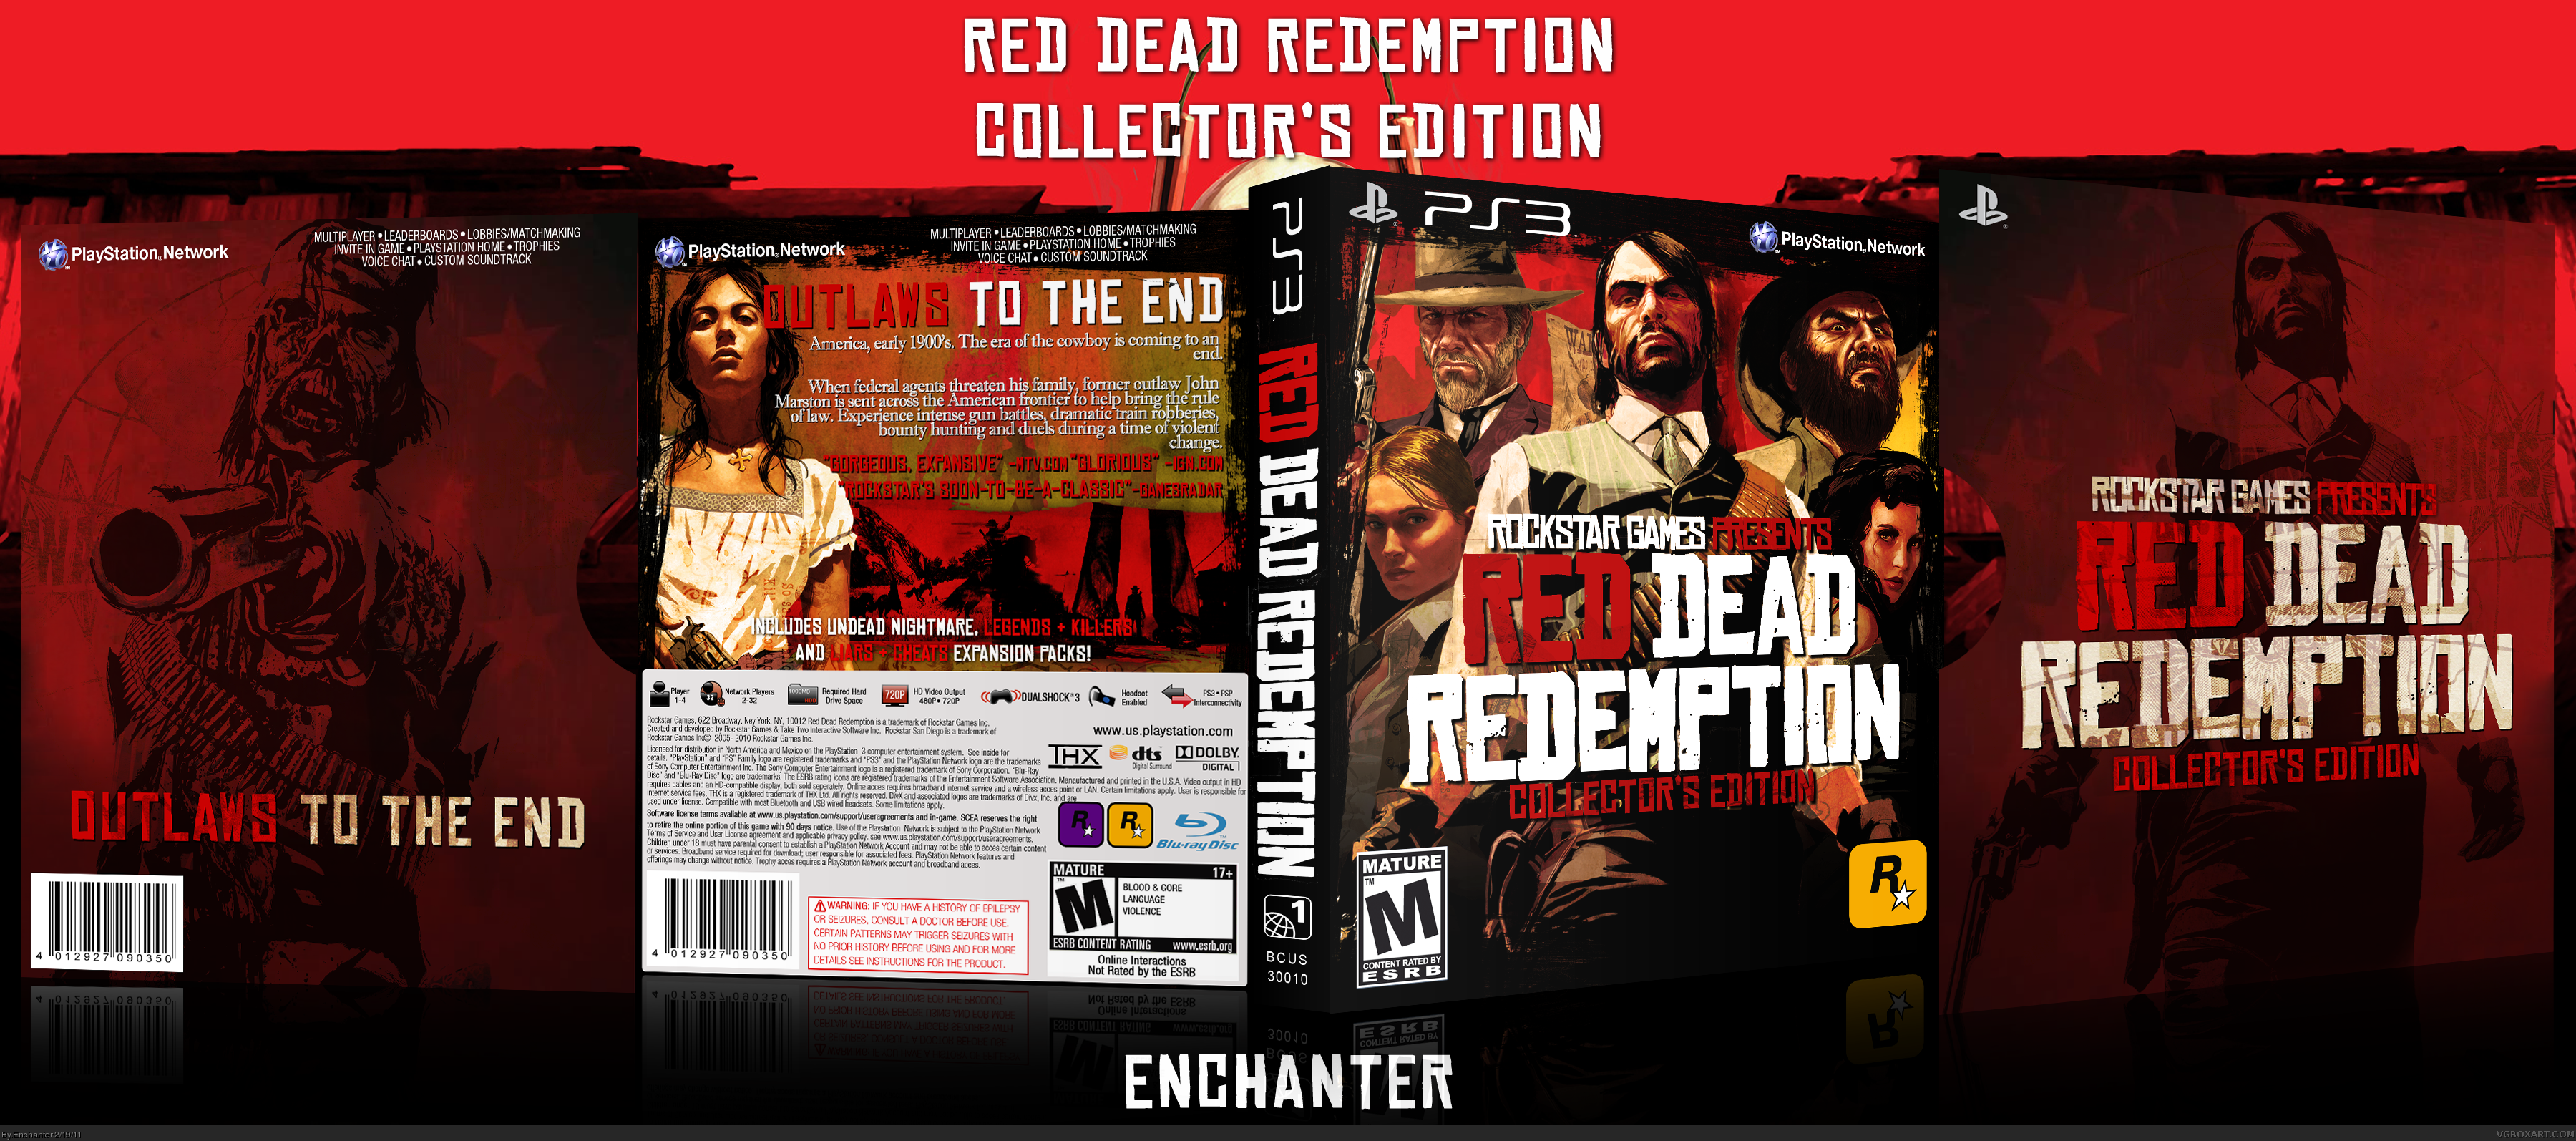 Red Dead Redemption: Collectors Edition box cover